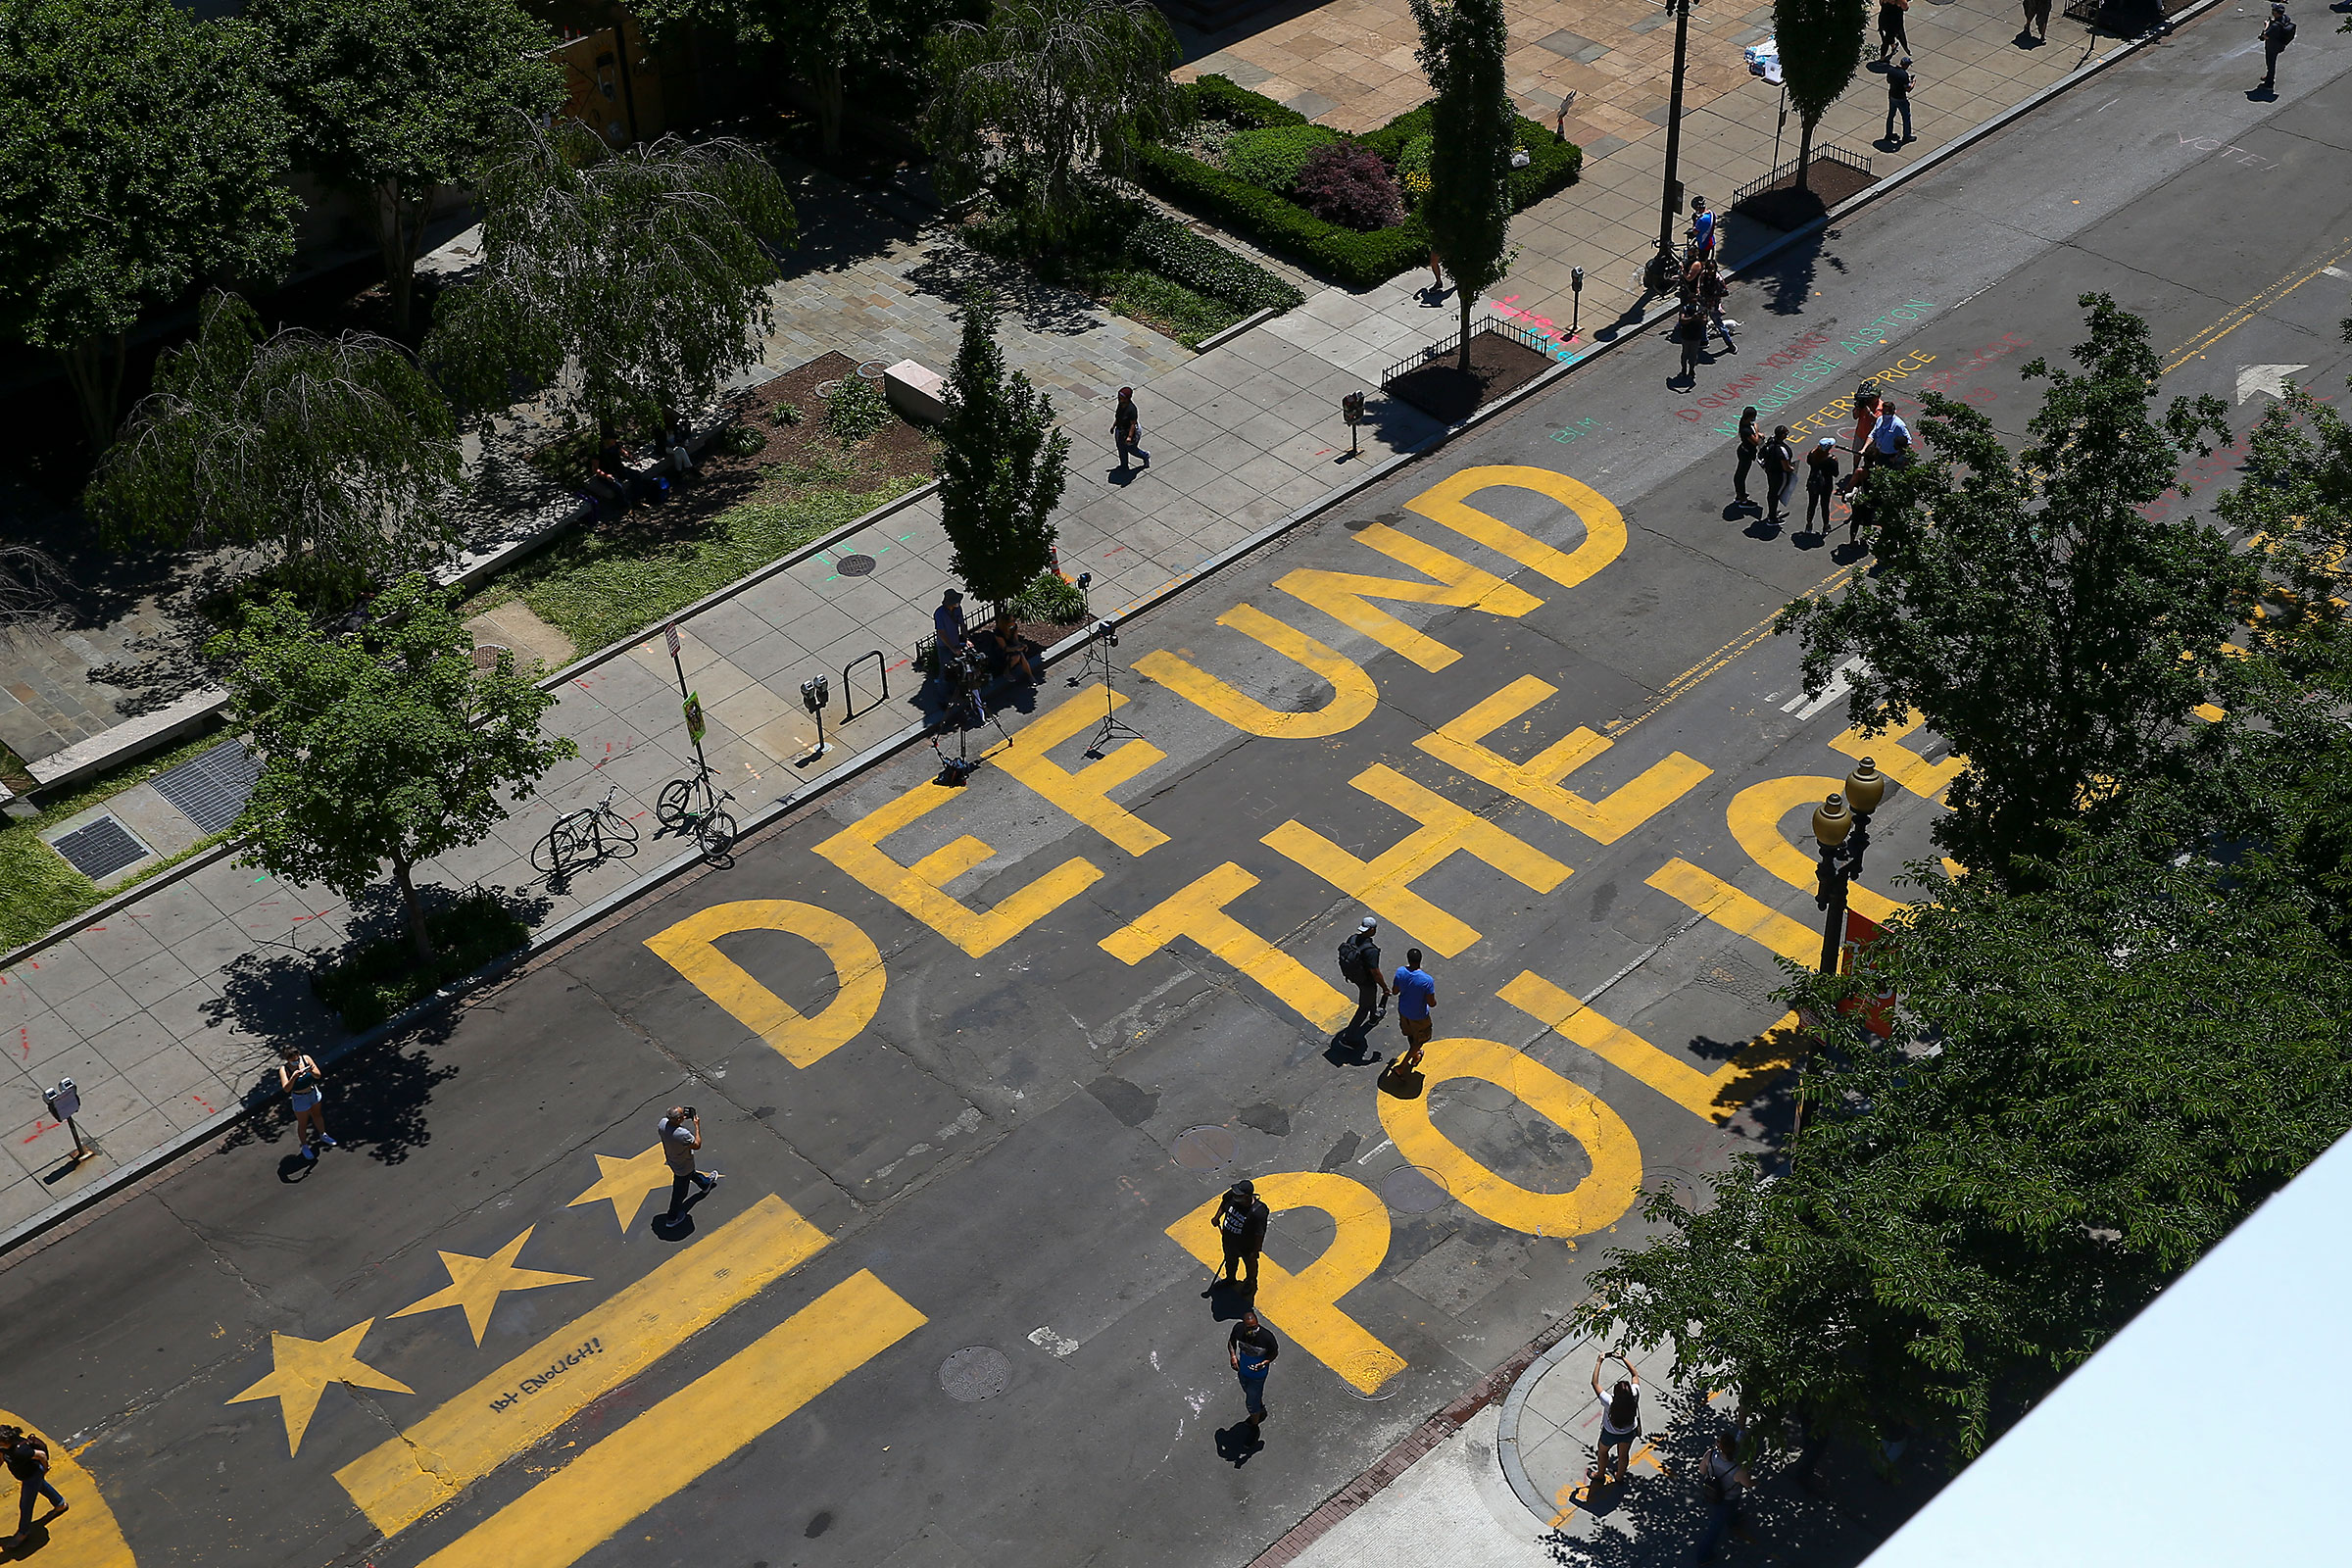 “Defund The Police” was painted on the street near the White House in Washington, D.C.